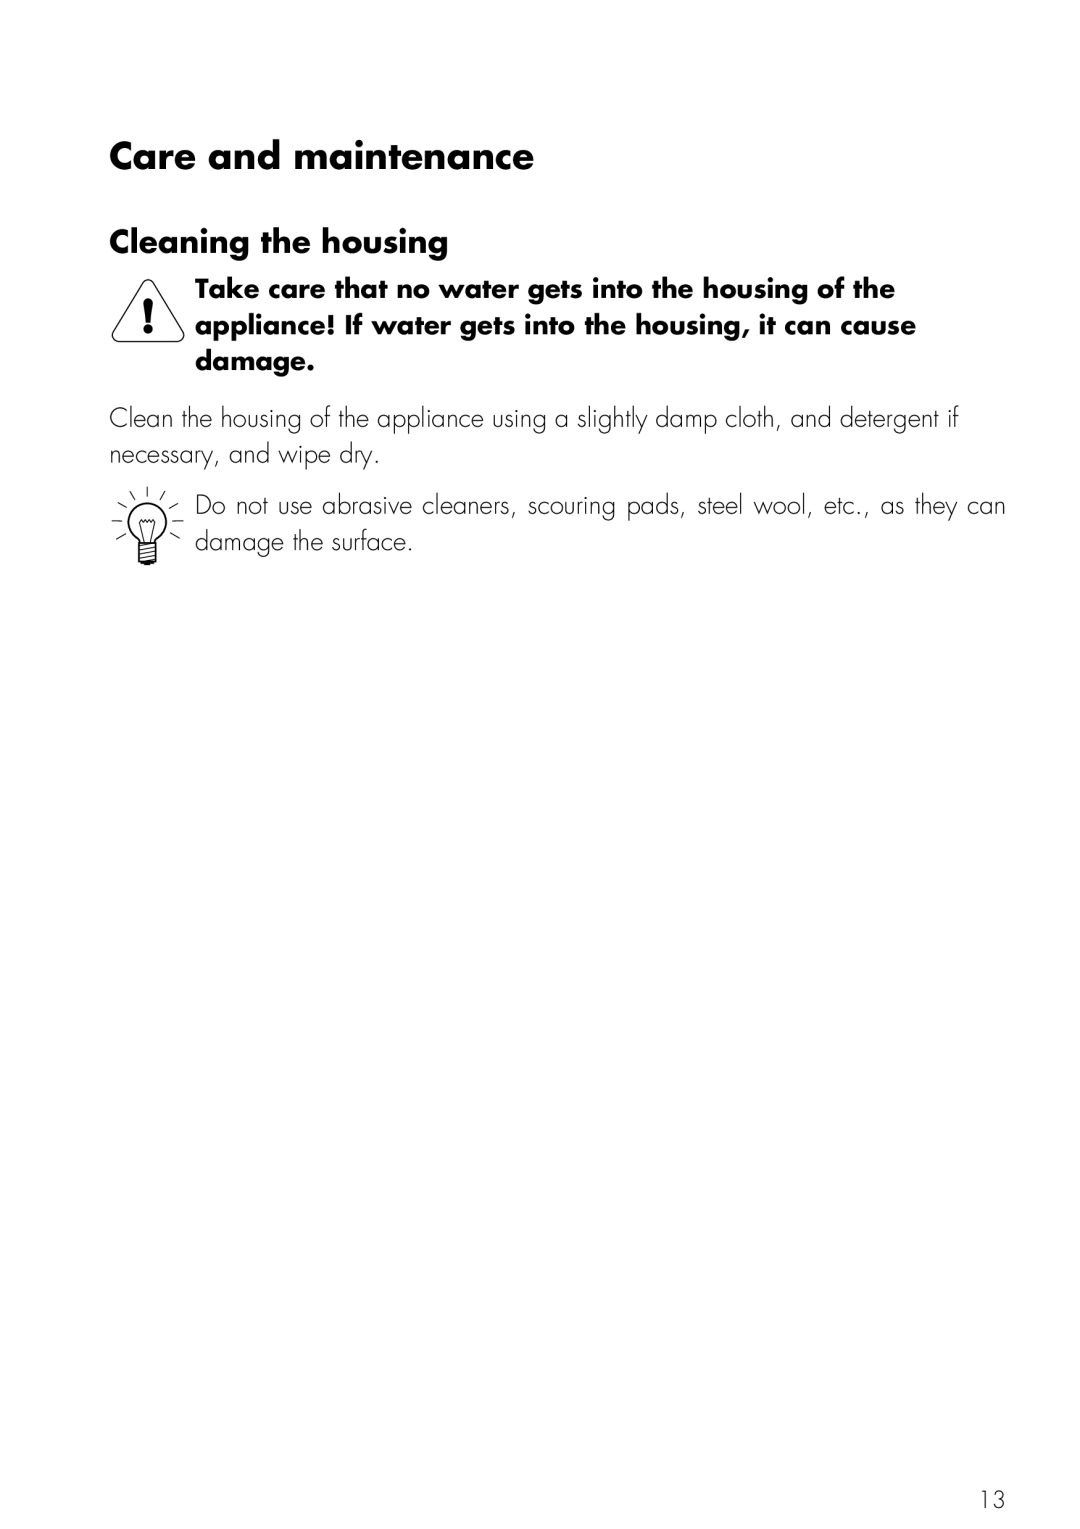 Mistral V ZUG LTD operating instructions Care and maintenance, Cleaning the housing 